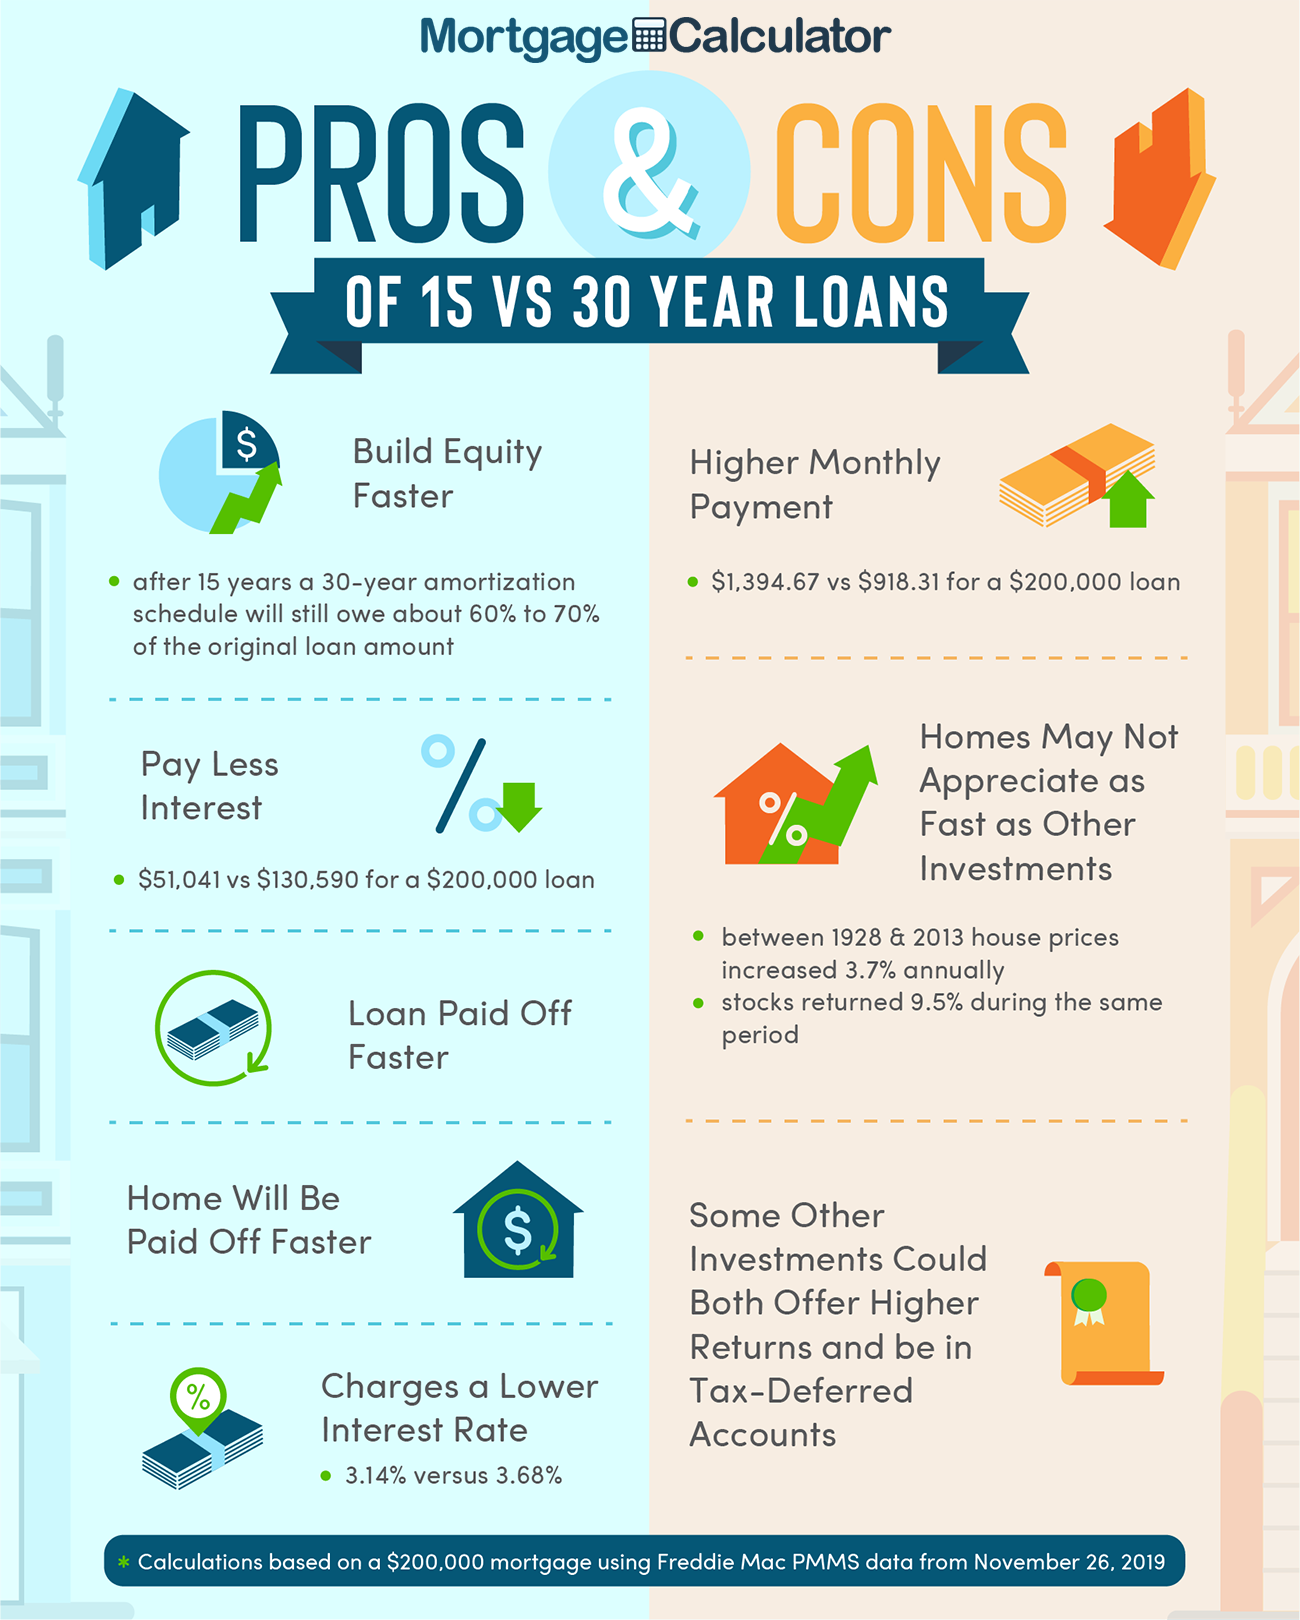 15 Year Mortgage Pros and Cons.